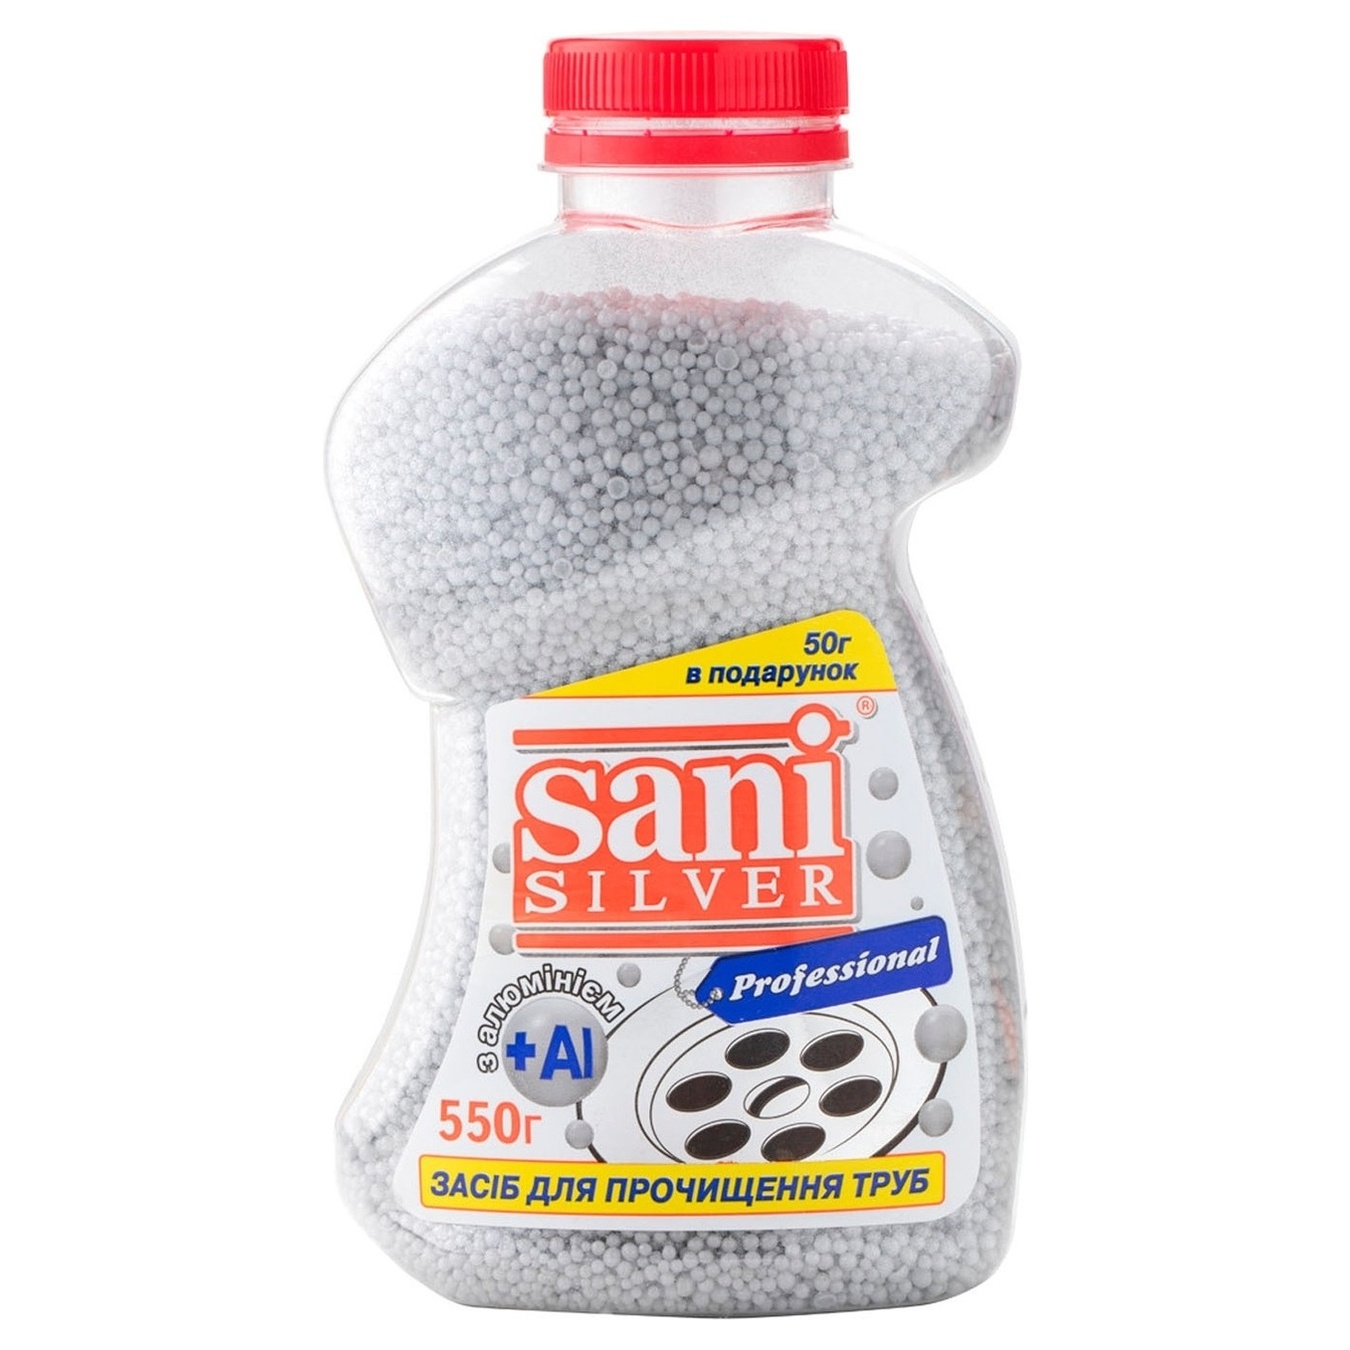 Sani Silver pipe cleaner 550g